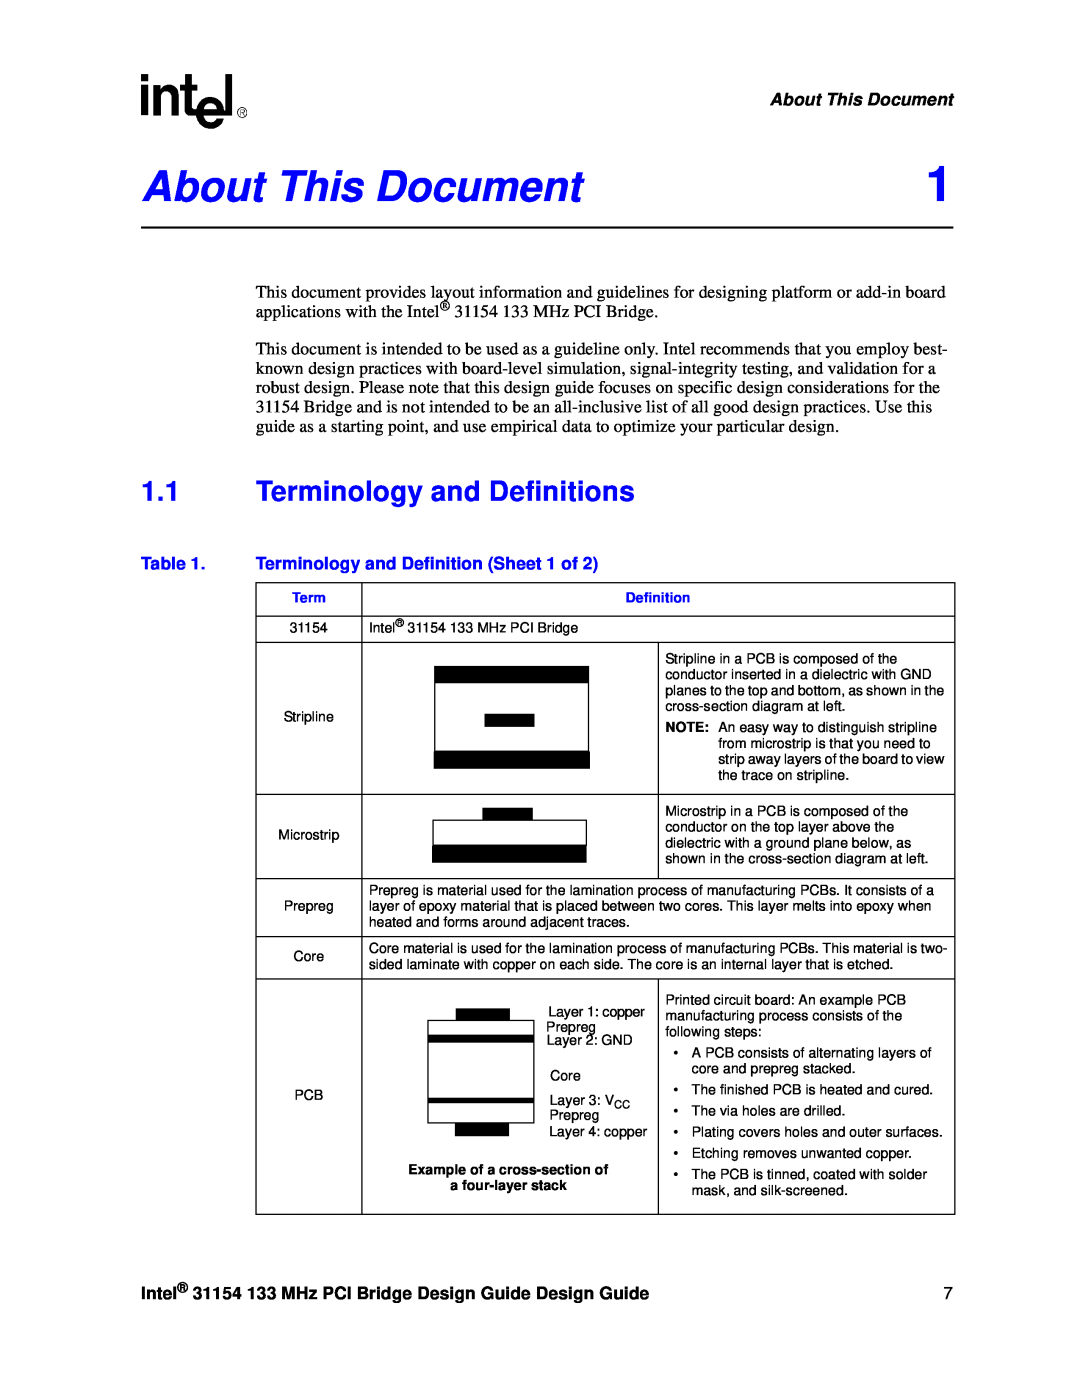 Intel 31154 manual About This Document, Terminology and Definitions, Terminology and Definition Sheet 1 of 